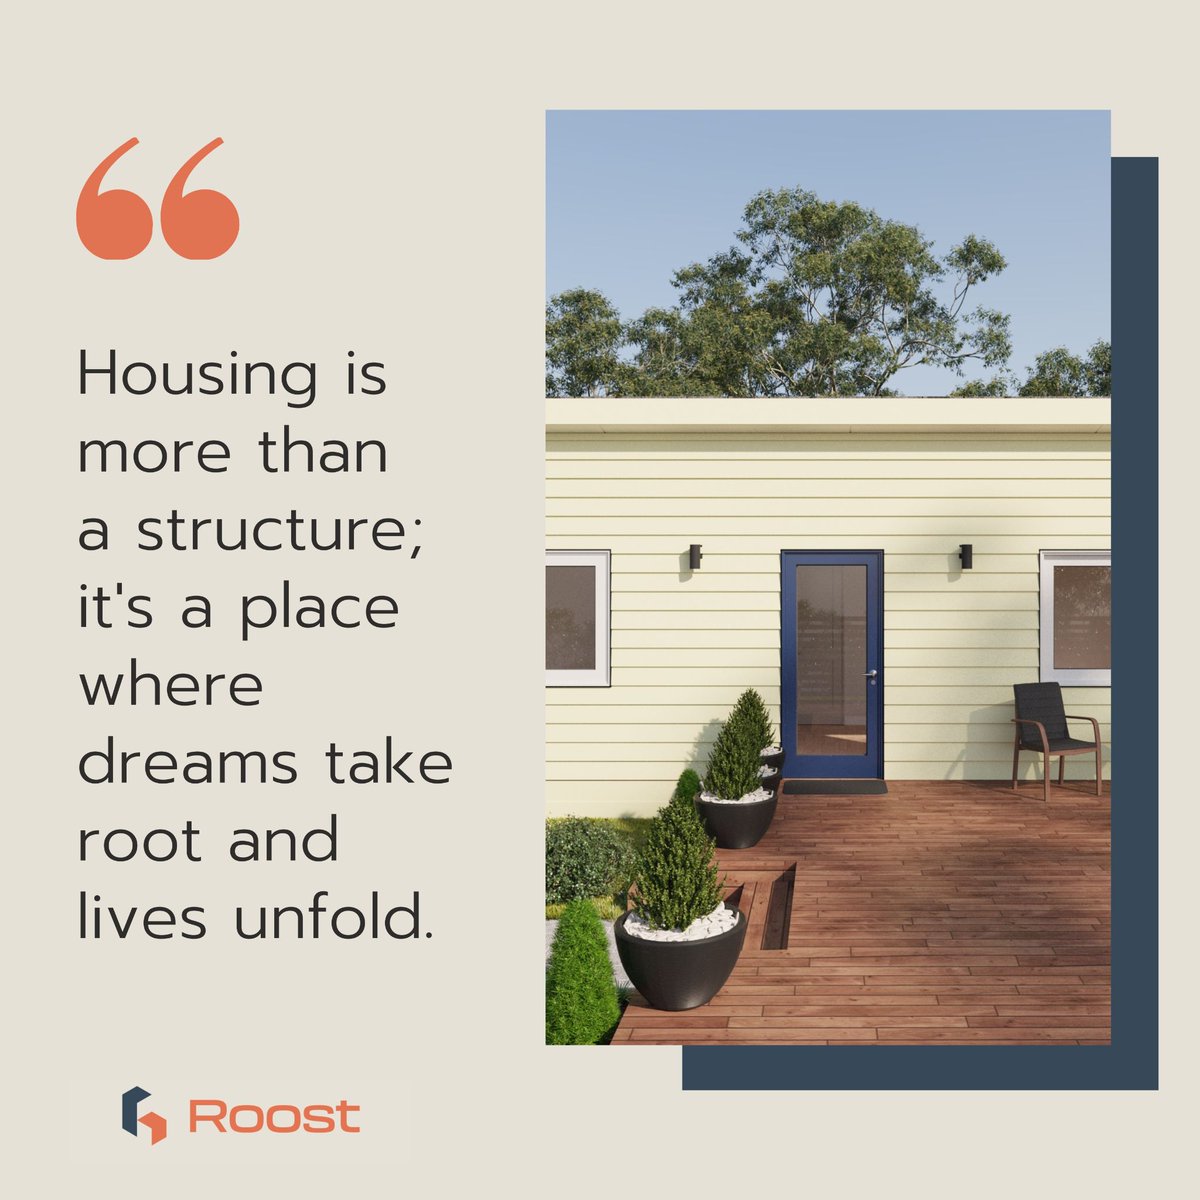 Roost ADUs: Building more than just houses; we're crafting dreams and creating homes. 
Discover a new chapter of living with us. 🏡✨ 
.
To explore more, visit our website: roostadu.com
.
#roostadu #dreamsintohomes #creatingspaces